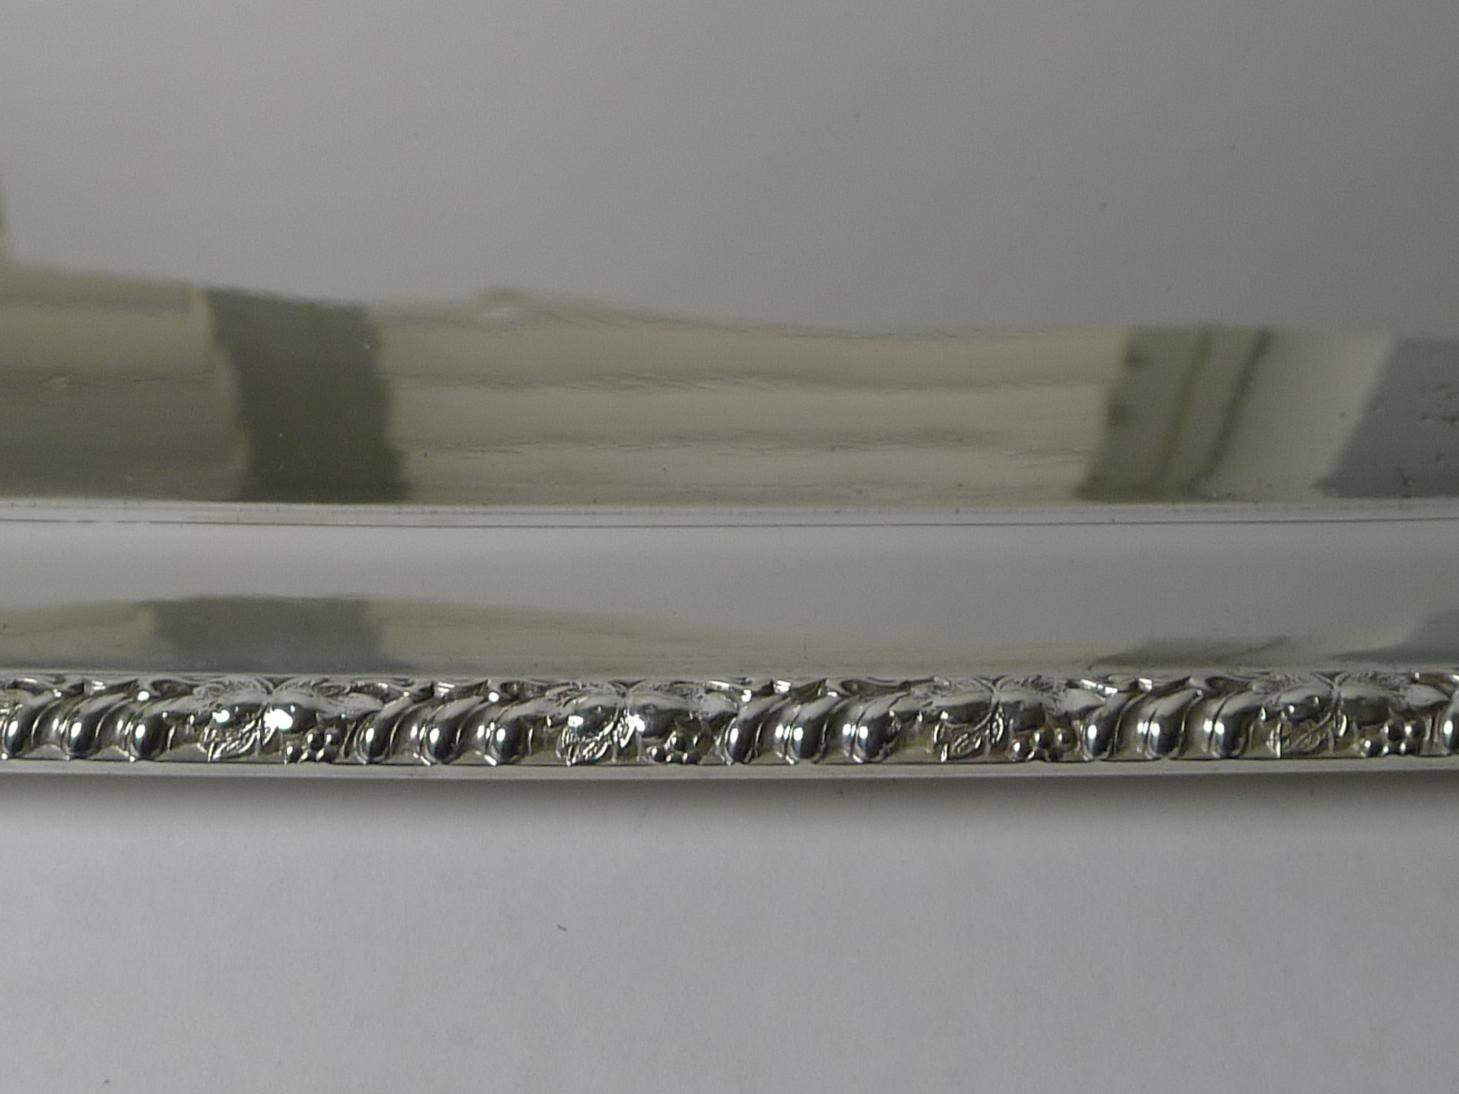 A very smart and elegant drinks or cocktail tray; made from English silver plate and fully marked on the underside by Barker Brothers of Birmingham, dating to the Edwardian era, around 1900 /1910. It is also marked EPNS for Electro-Plated Nickel